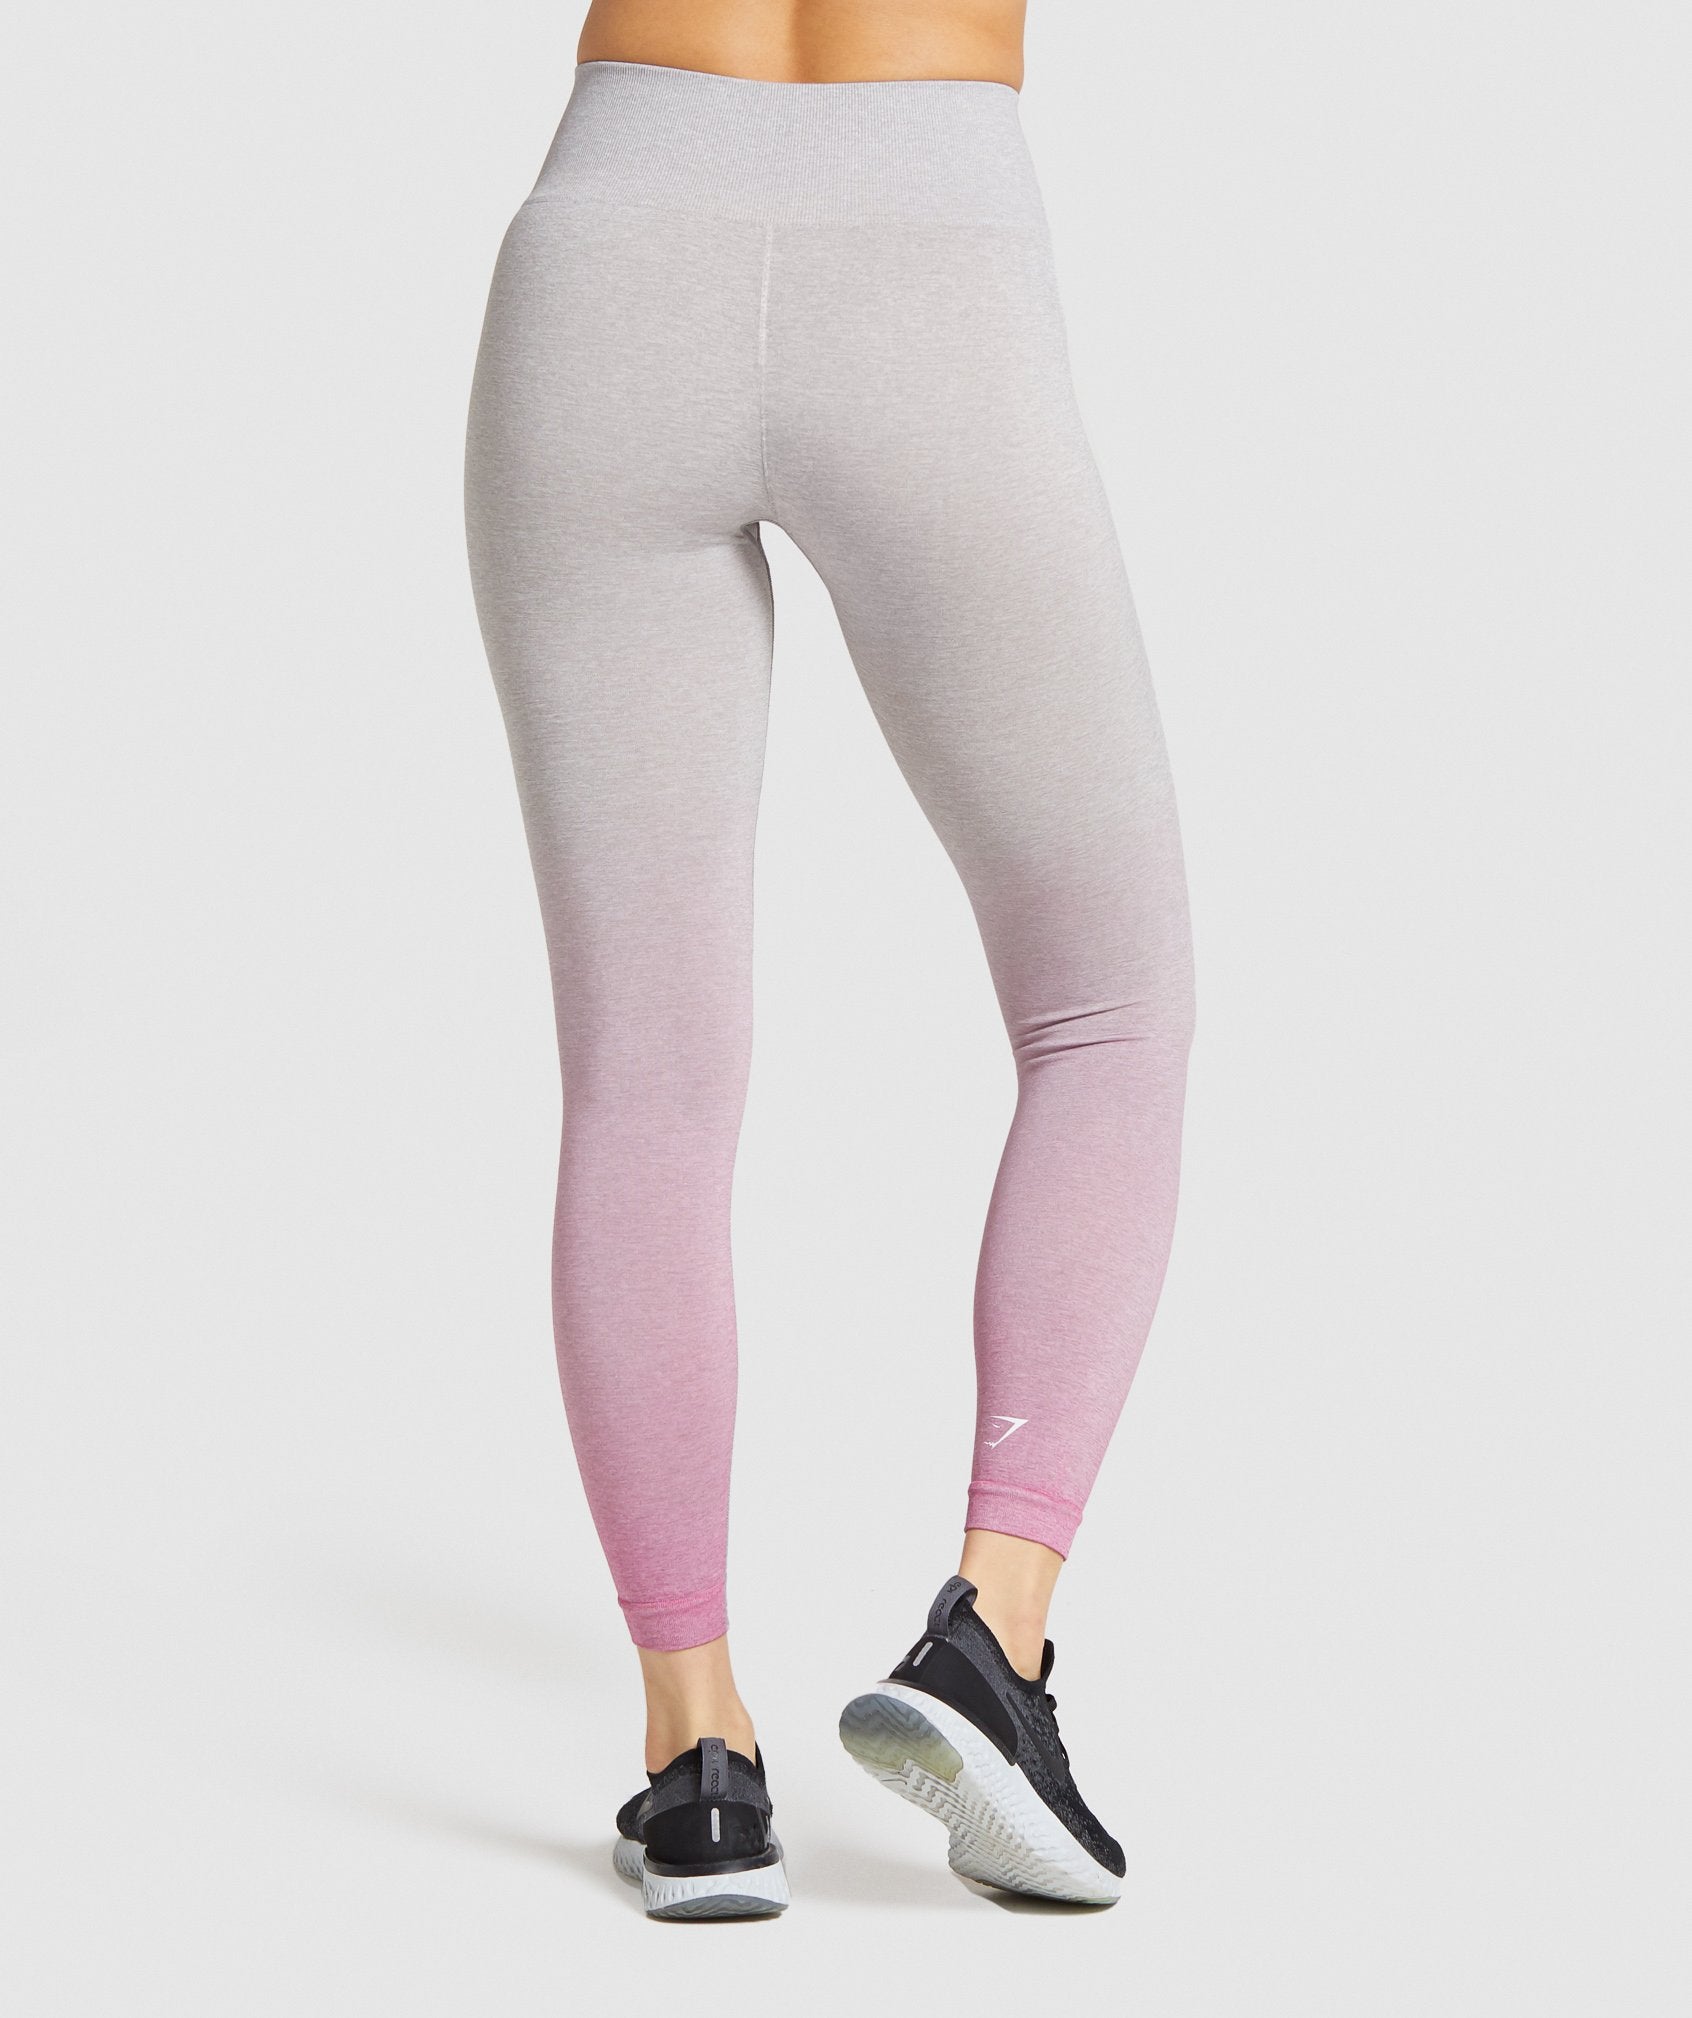 Adapt Ombre Seamless Leggings in Light Grey Marl/Pink - view 2